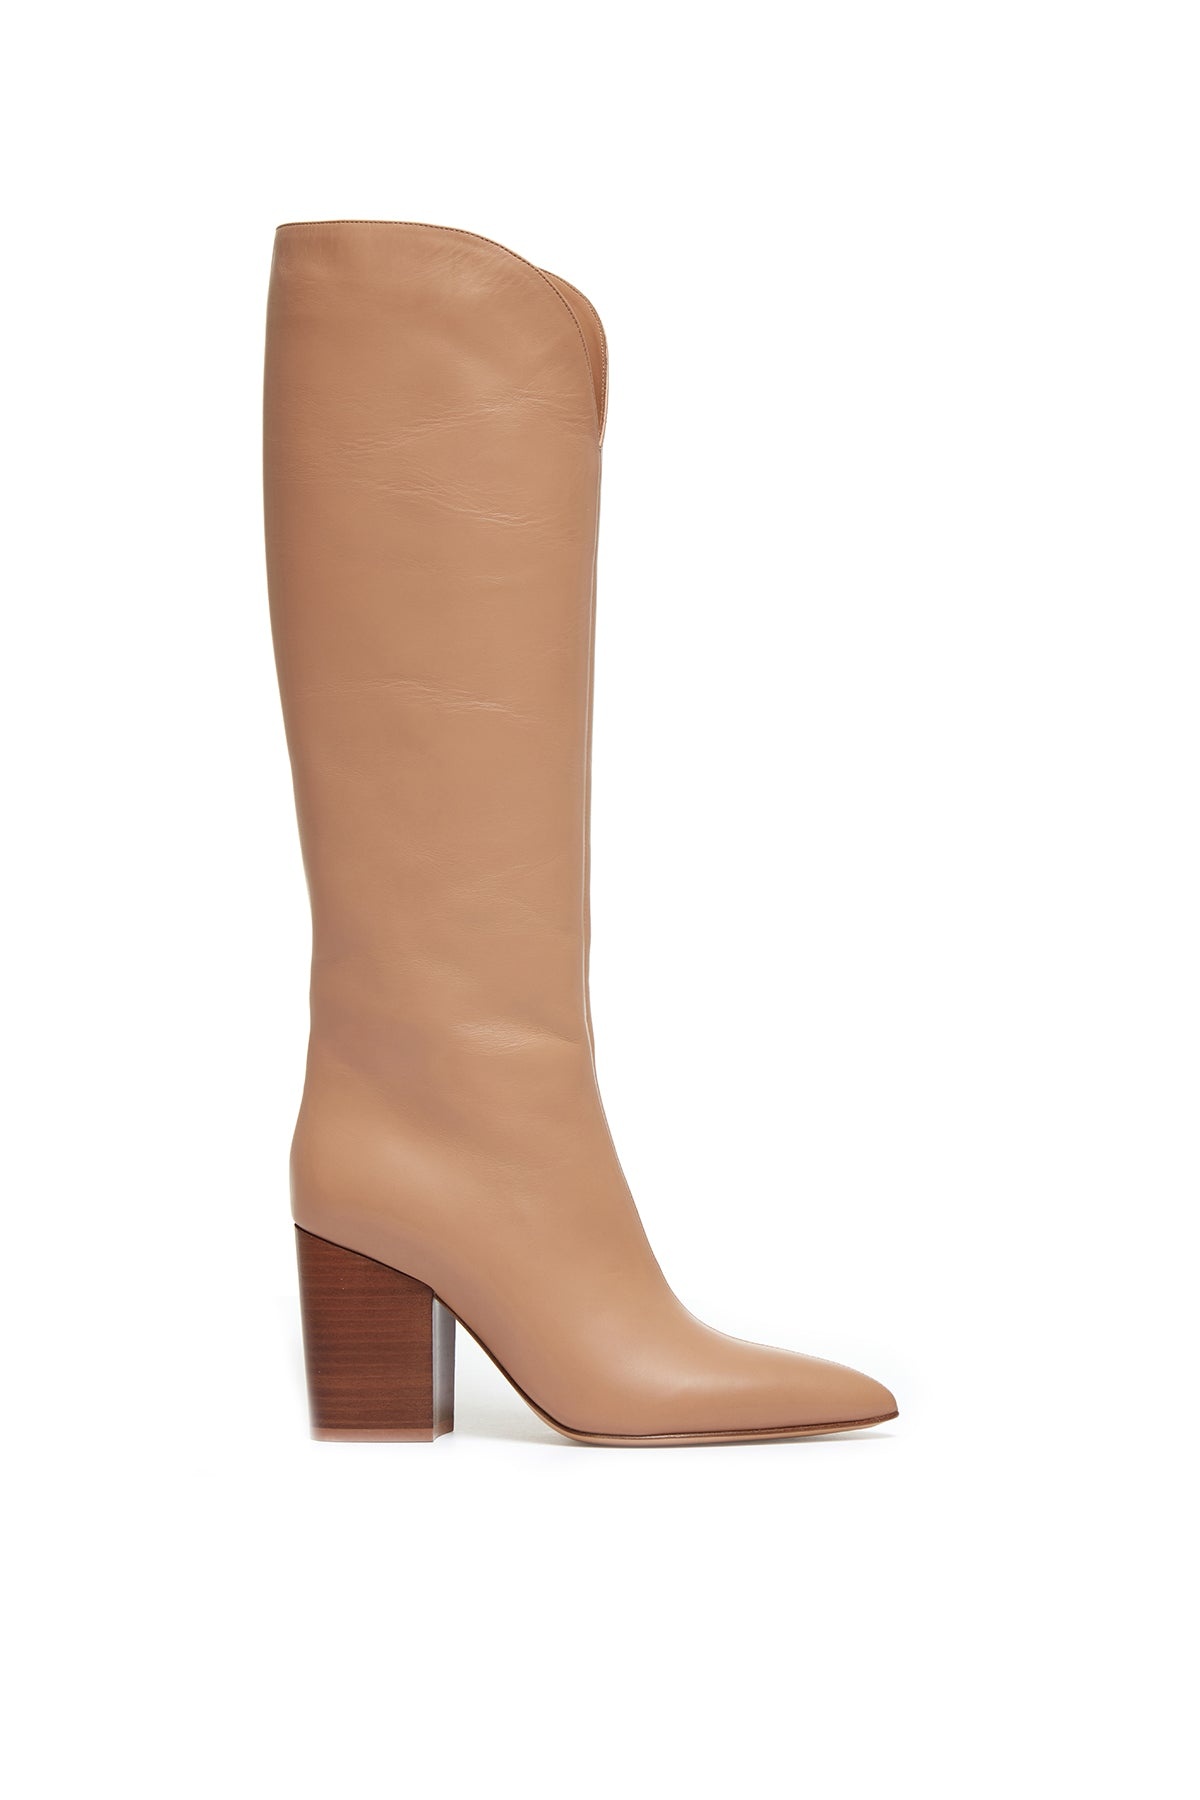 Cora Knee High Boot in Camel Leather - 1